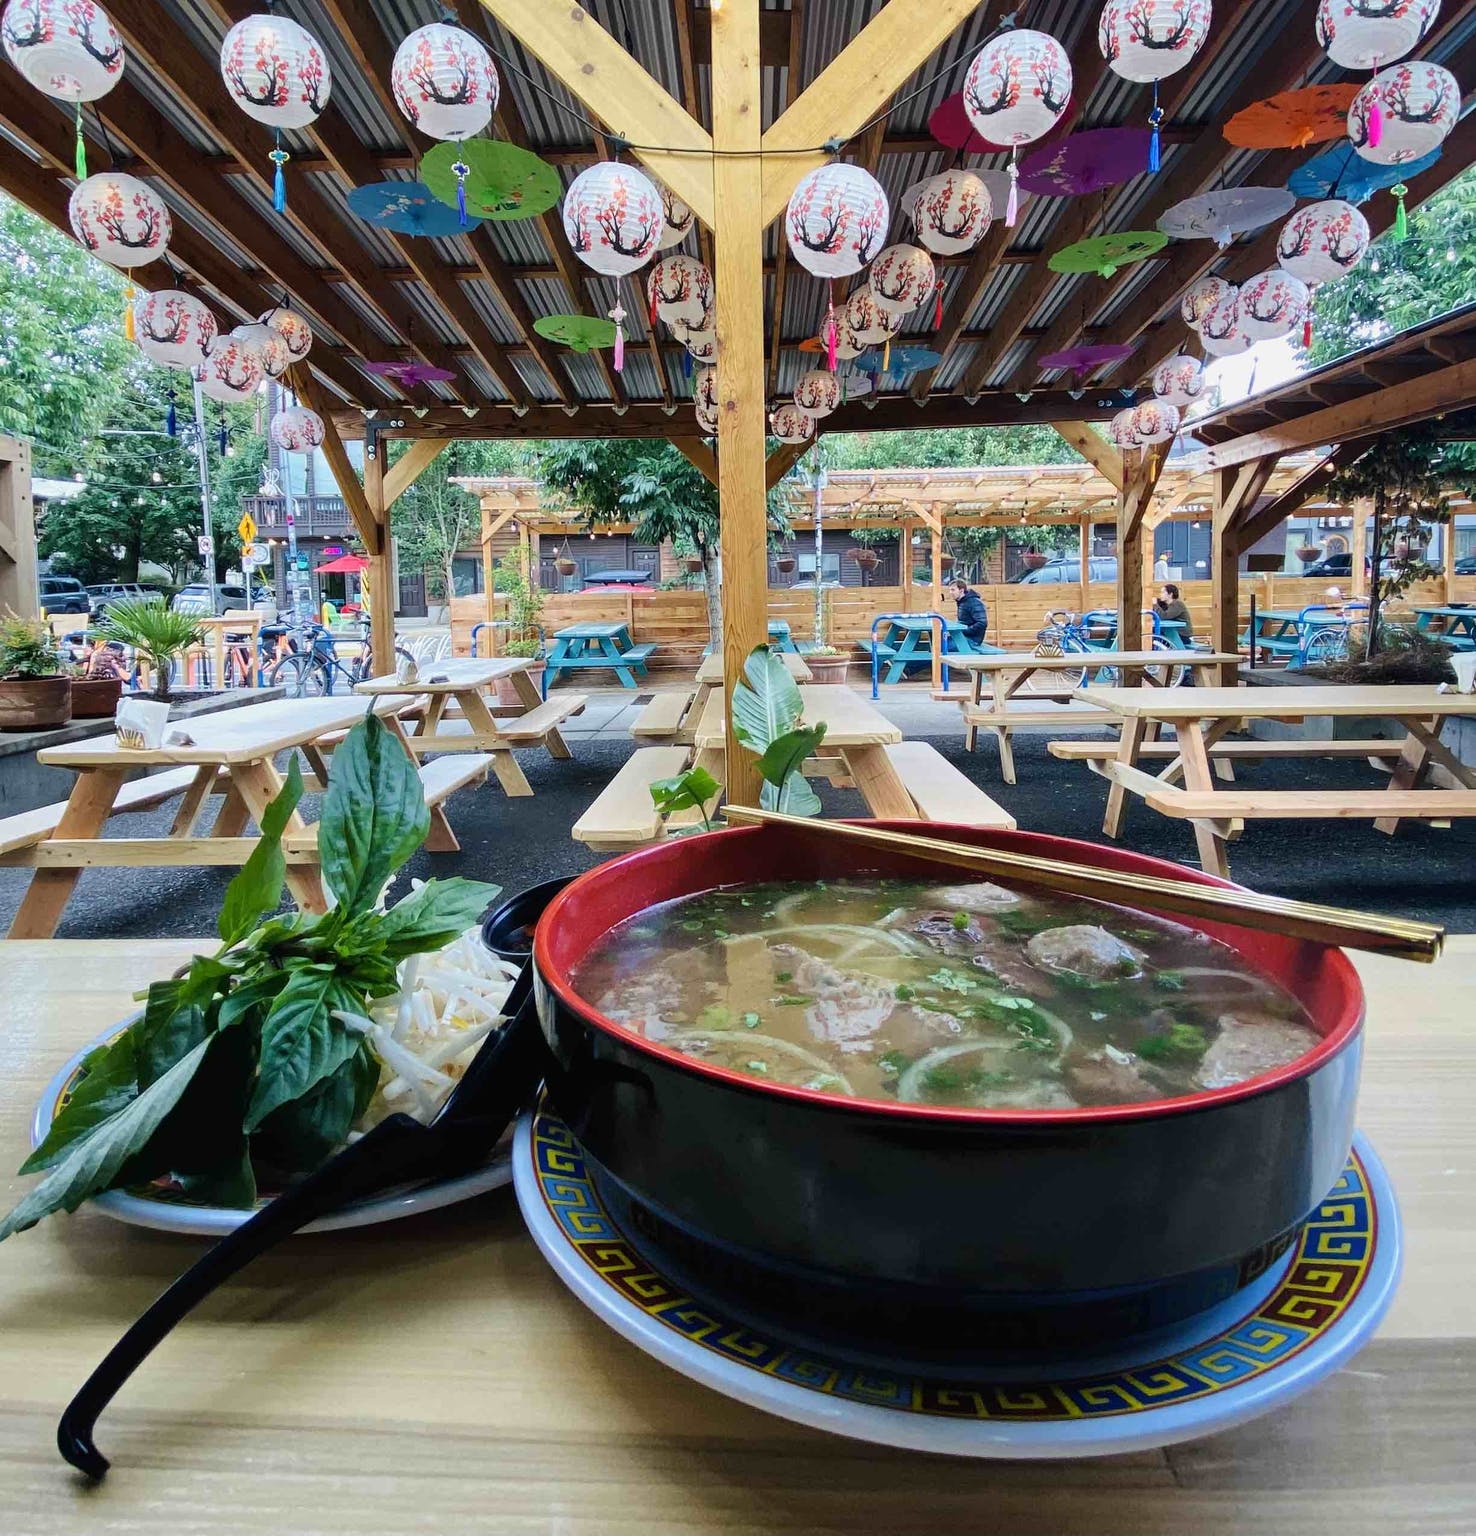 Patio seating at restaurant and bowl of noodle soup